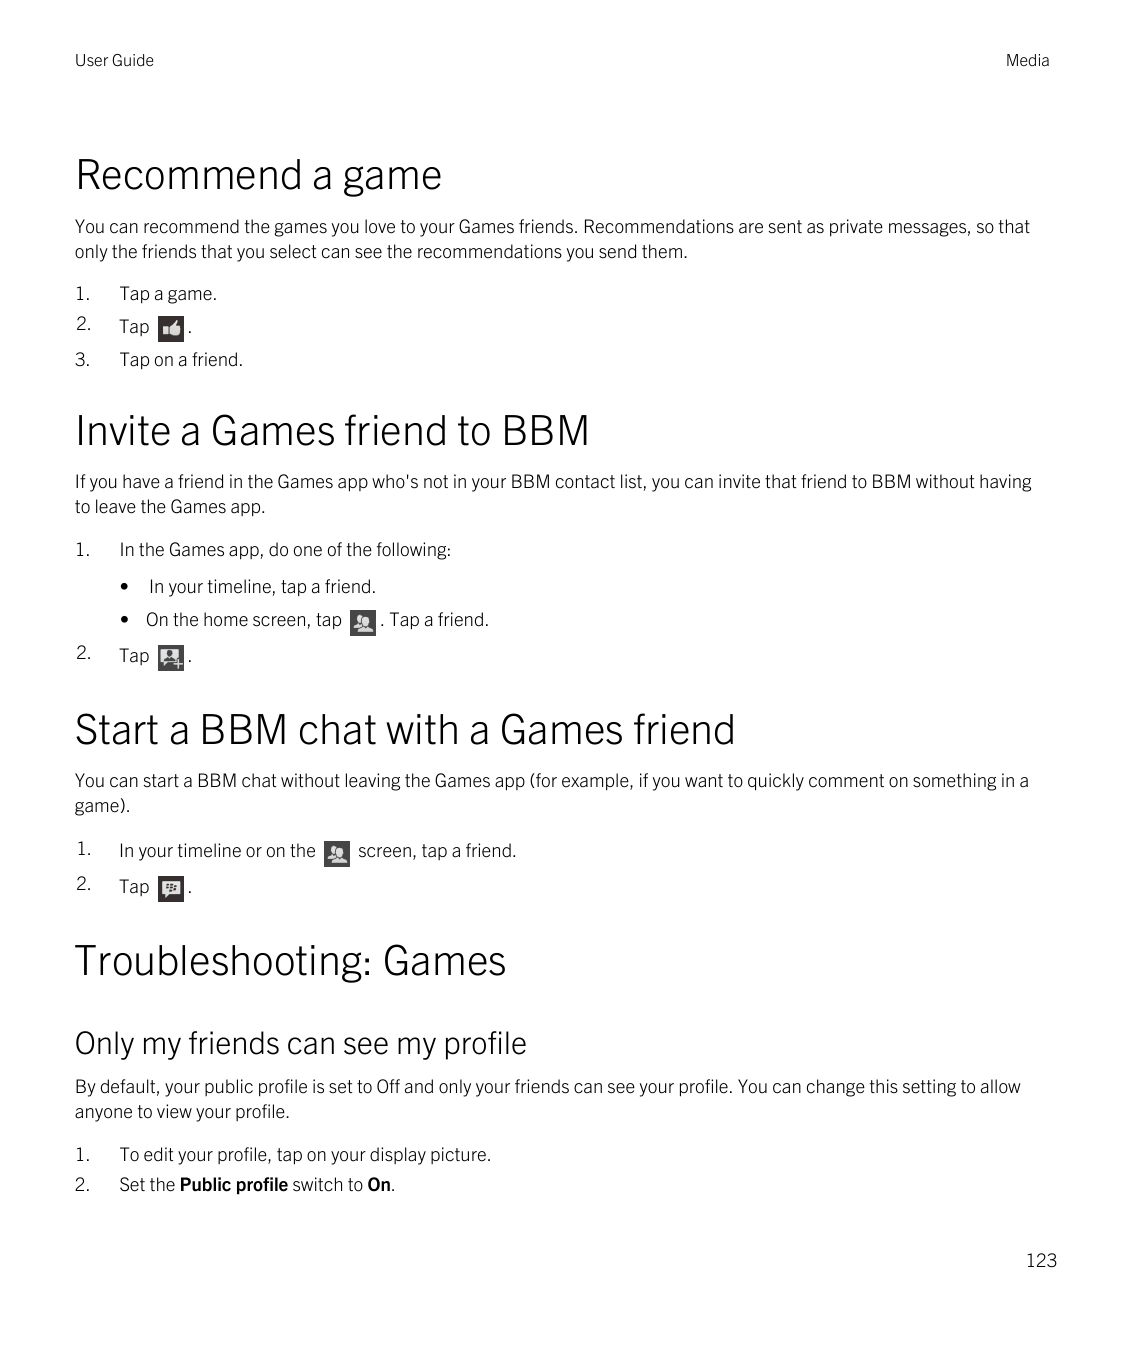 User GuideMediaRecommend a gameYou can recommend the games you love to your Games friends. Recommendations are sent as private m